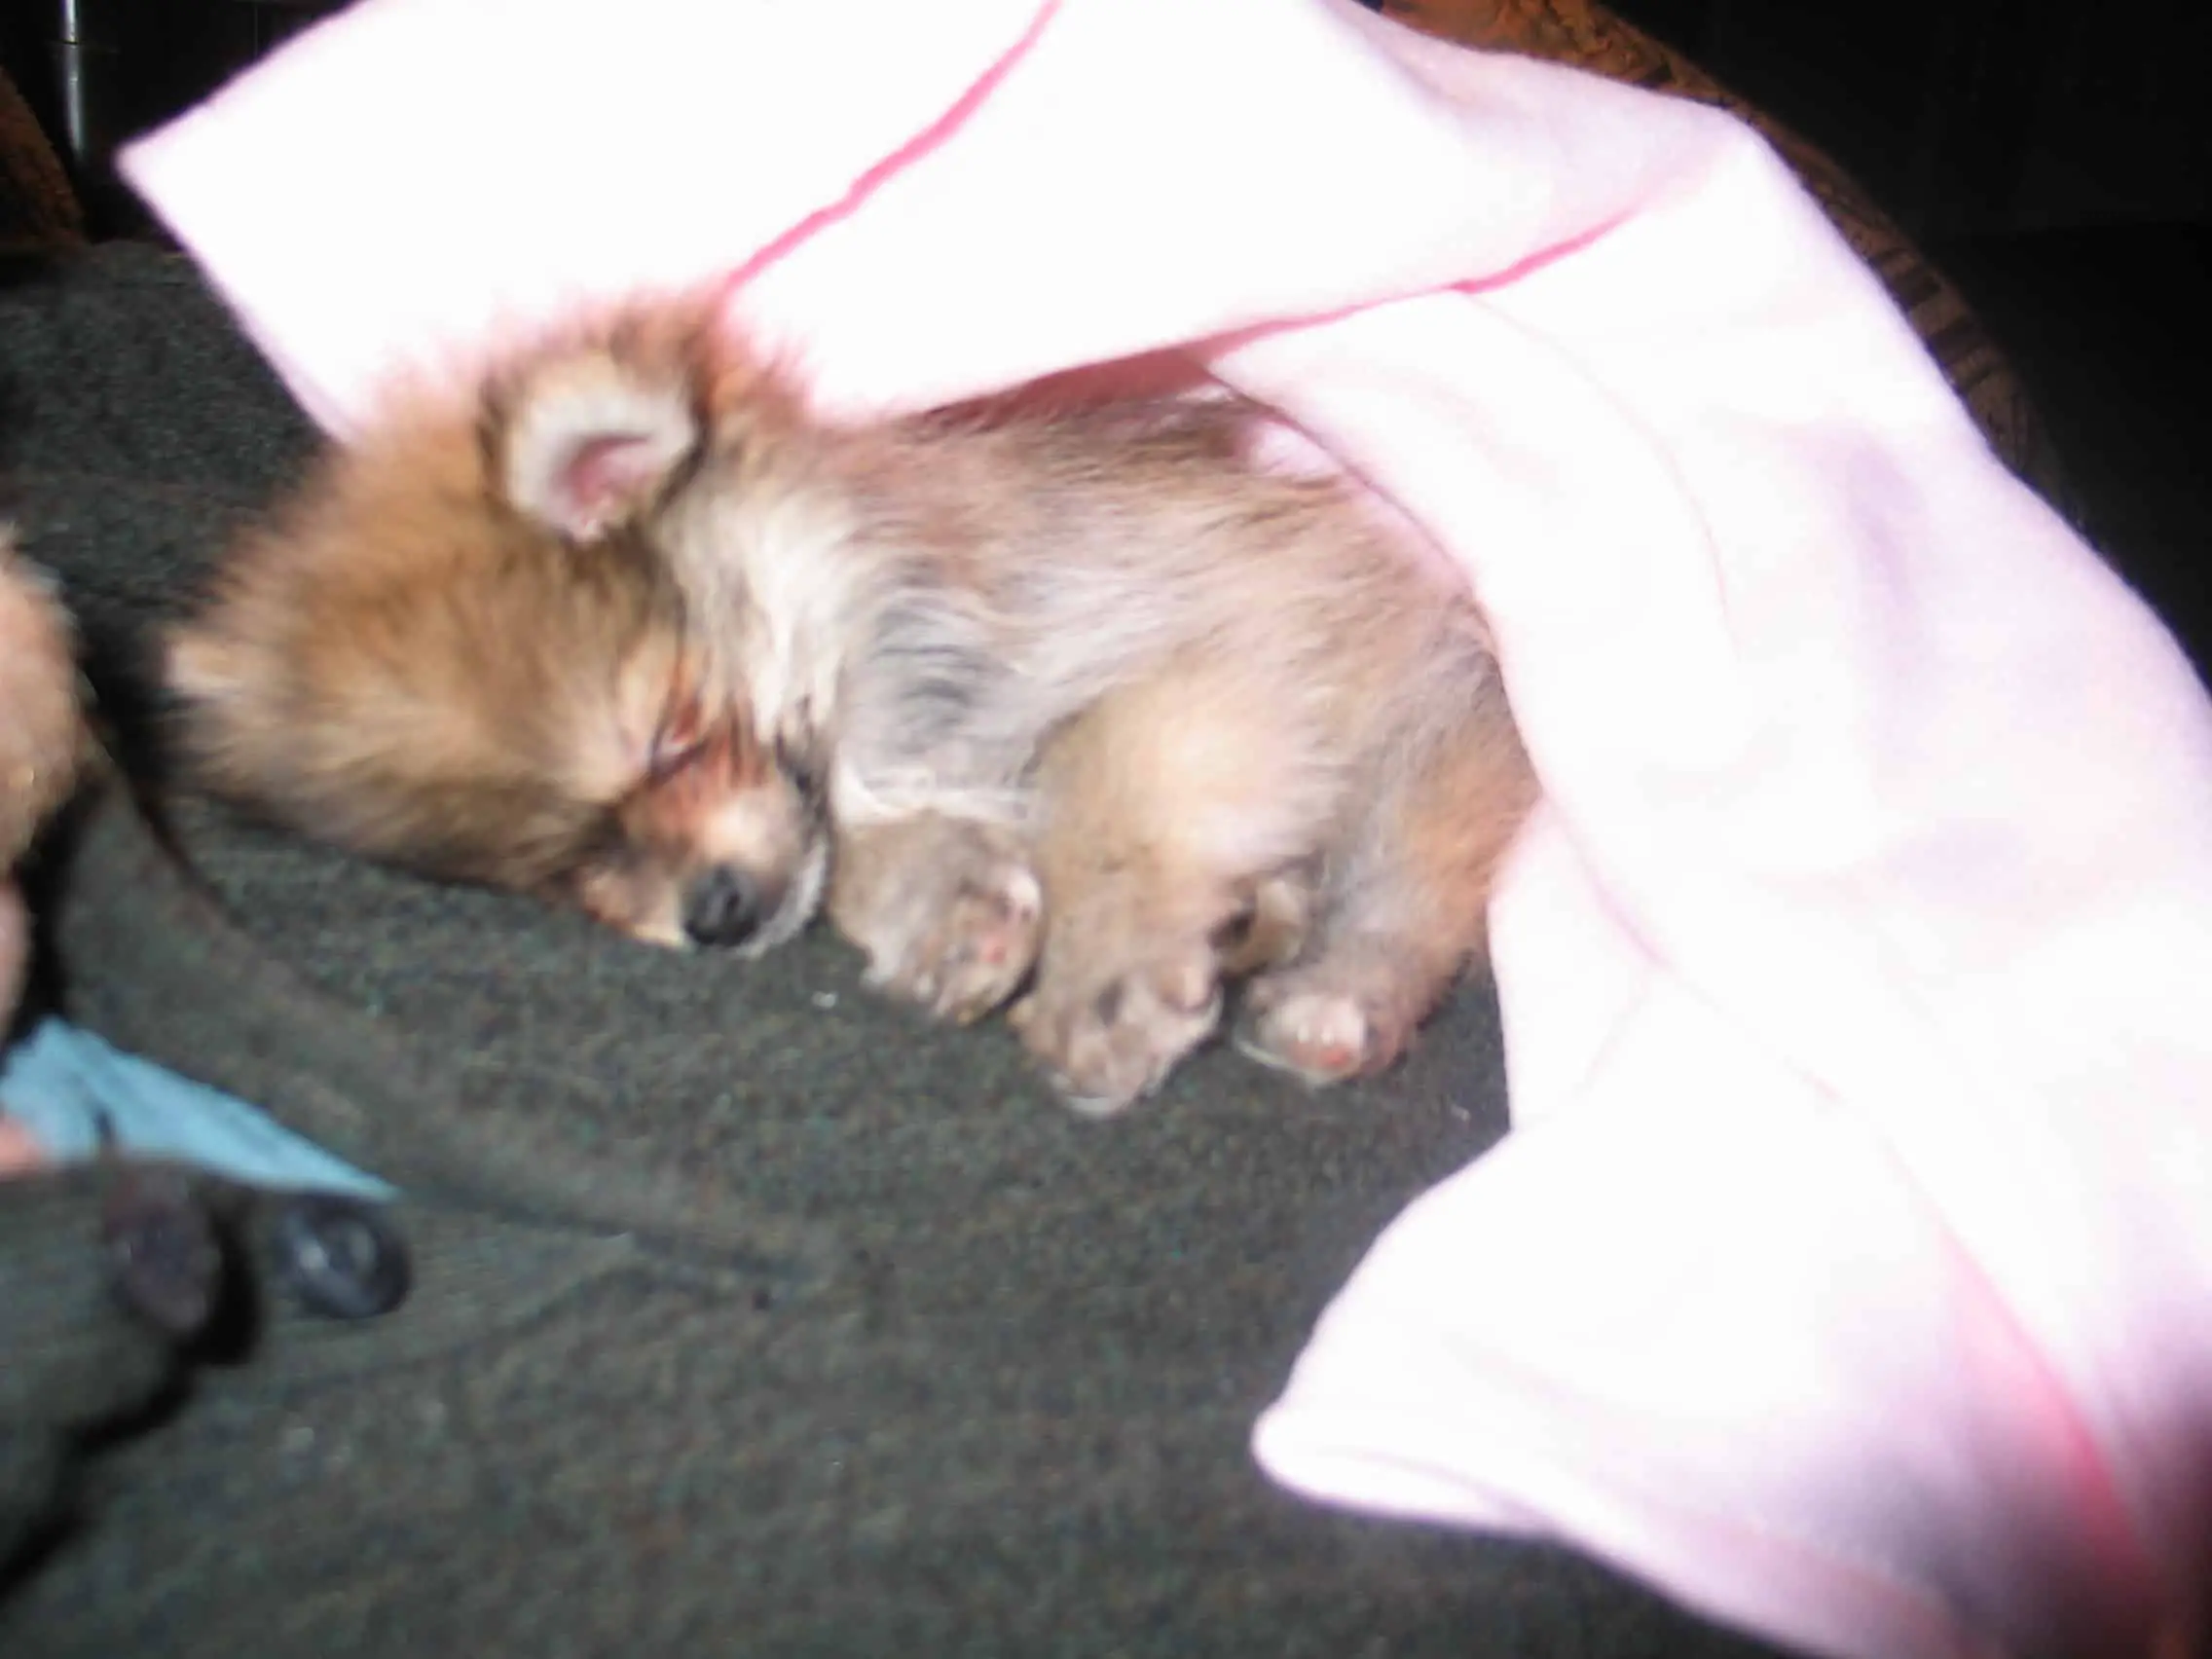 Our teacup Pomeranian asleep on daddy's chest. Looks like a tiny wolf. Only a bit of red but mostly gray.